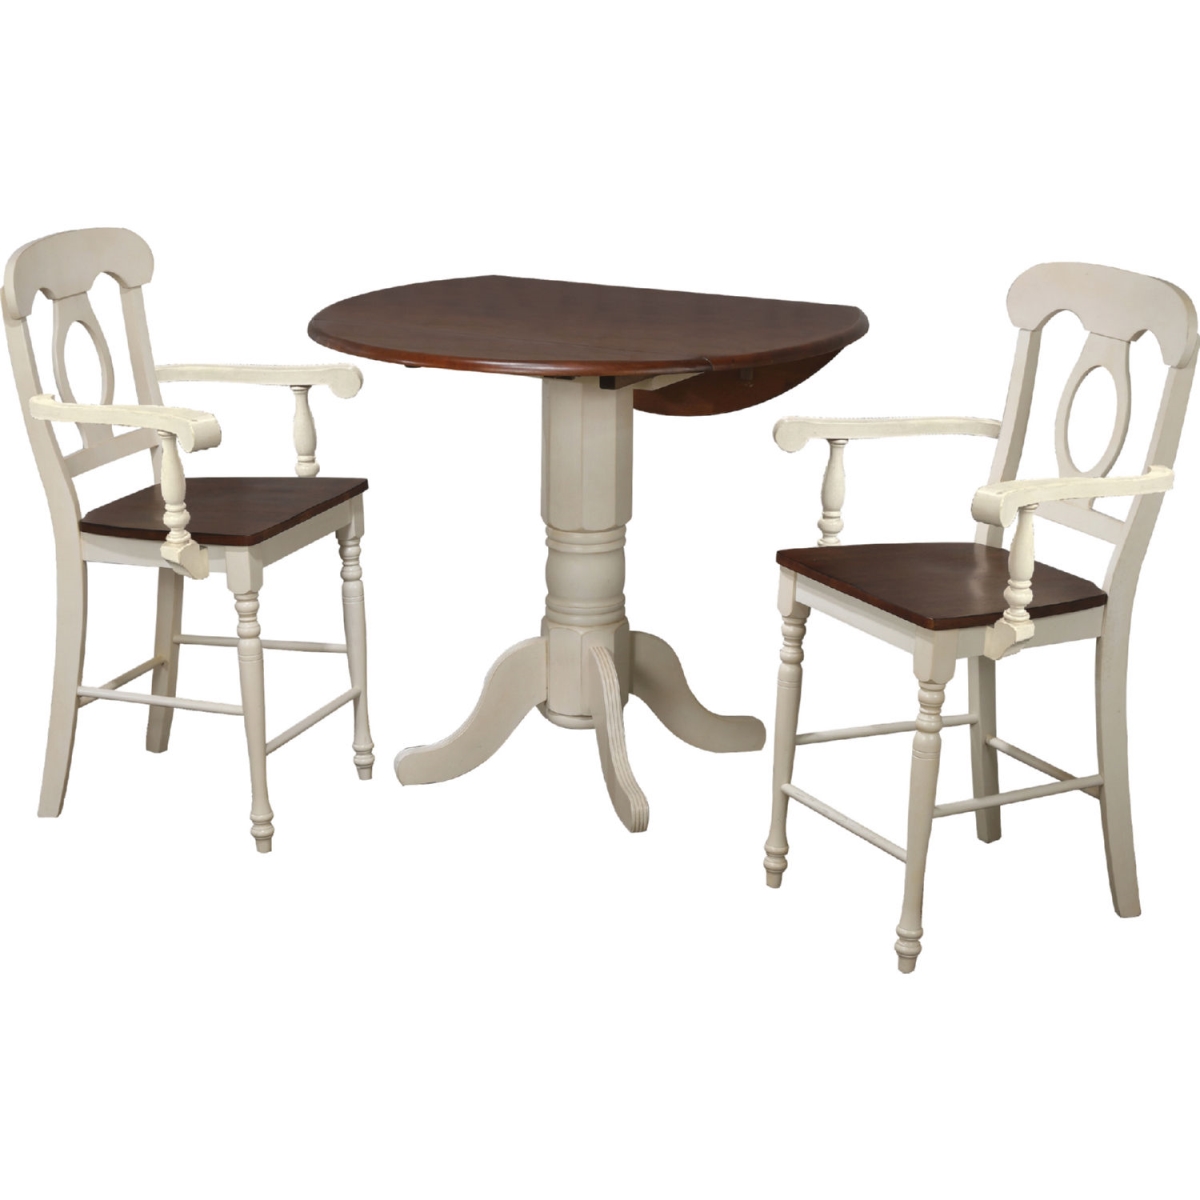 42 in. Andrews Round Drop Leaf Pub Table Set for 2 Barstools with Arms & Seats 6, Antique White & Chestnut Brown - 3 Piece -  Fine-line, FI3215850